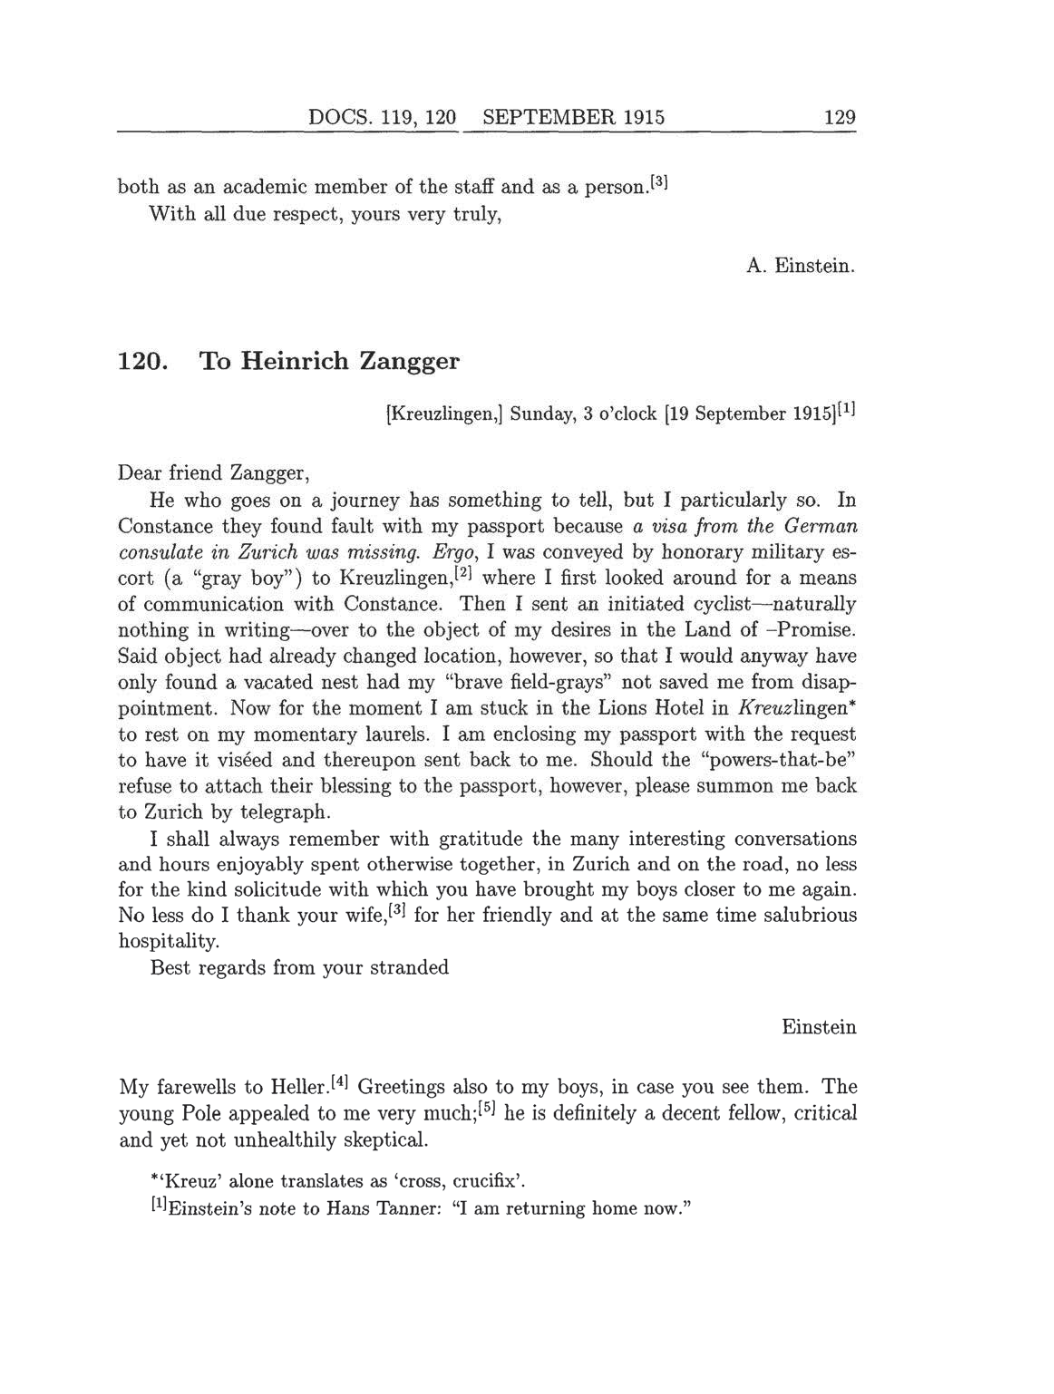 Volume 8: The Berlin Years: Correspondence, 1914-1918 (English translation supplement) page 129